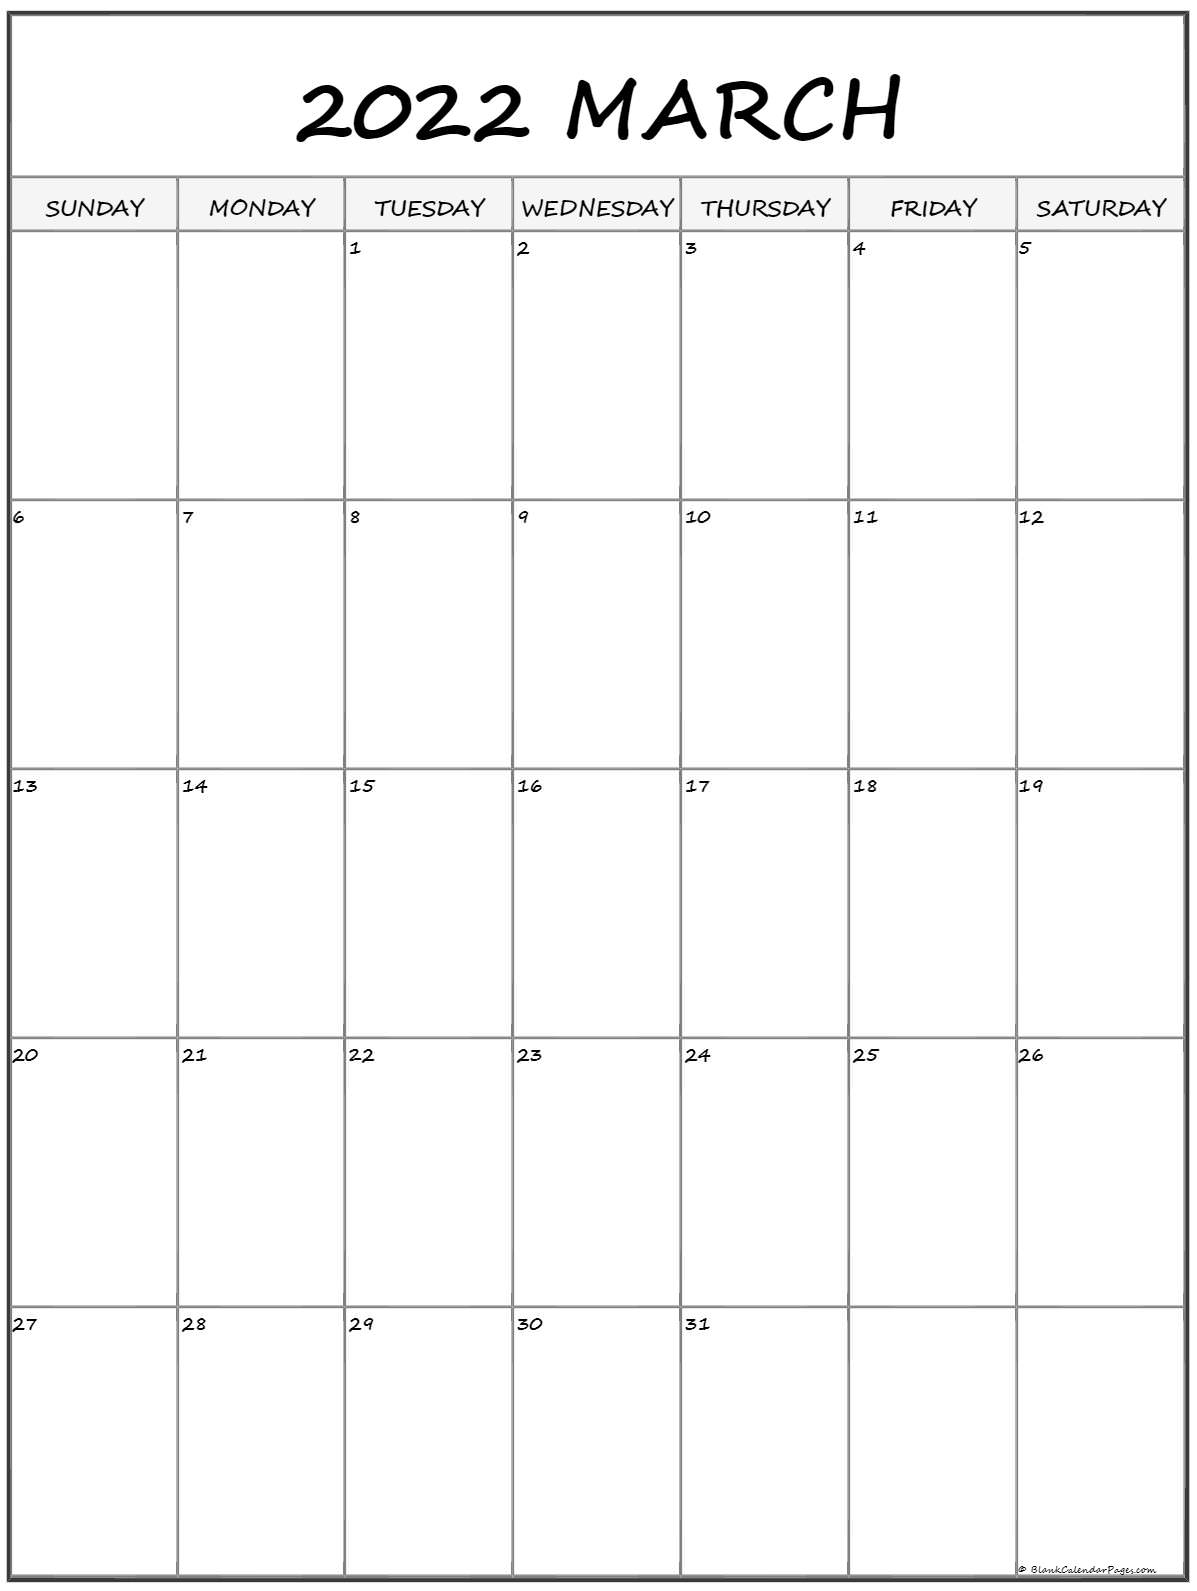 Take March 2022 Calendar With Holidays Printable